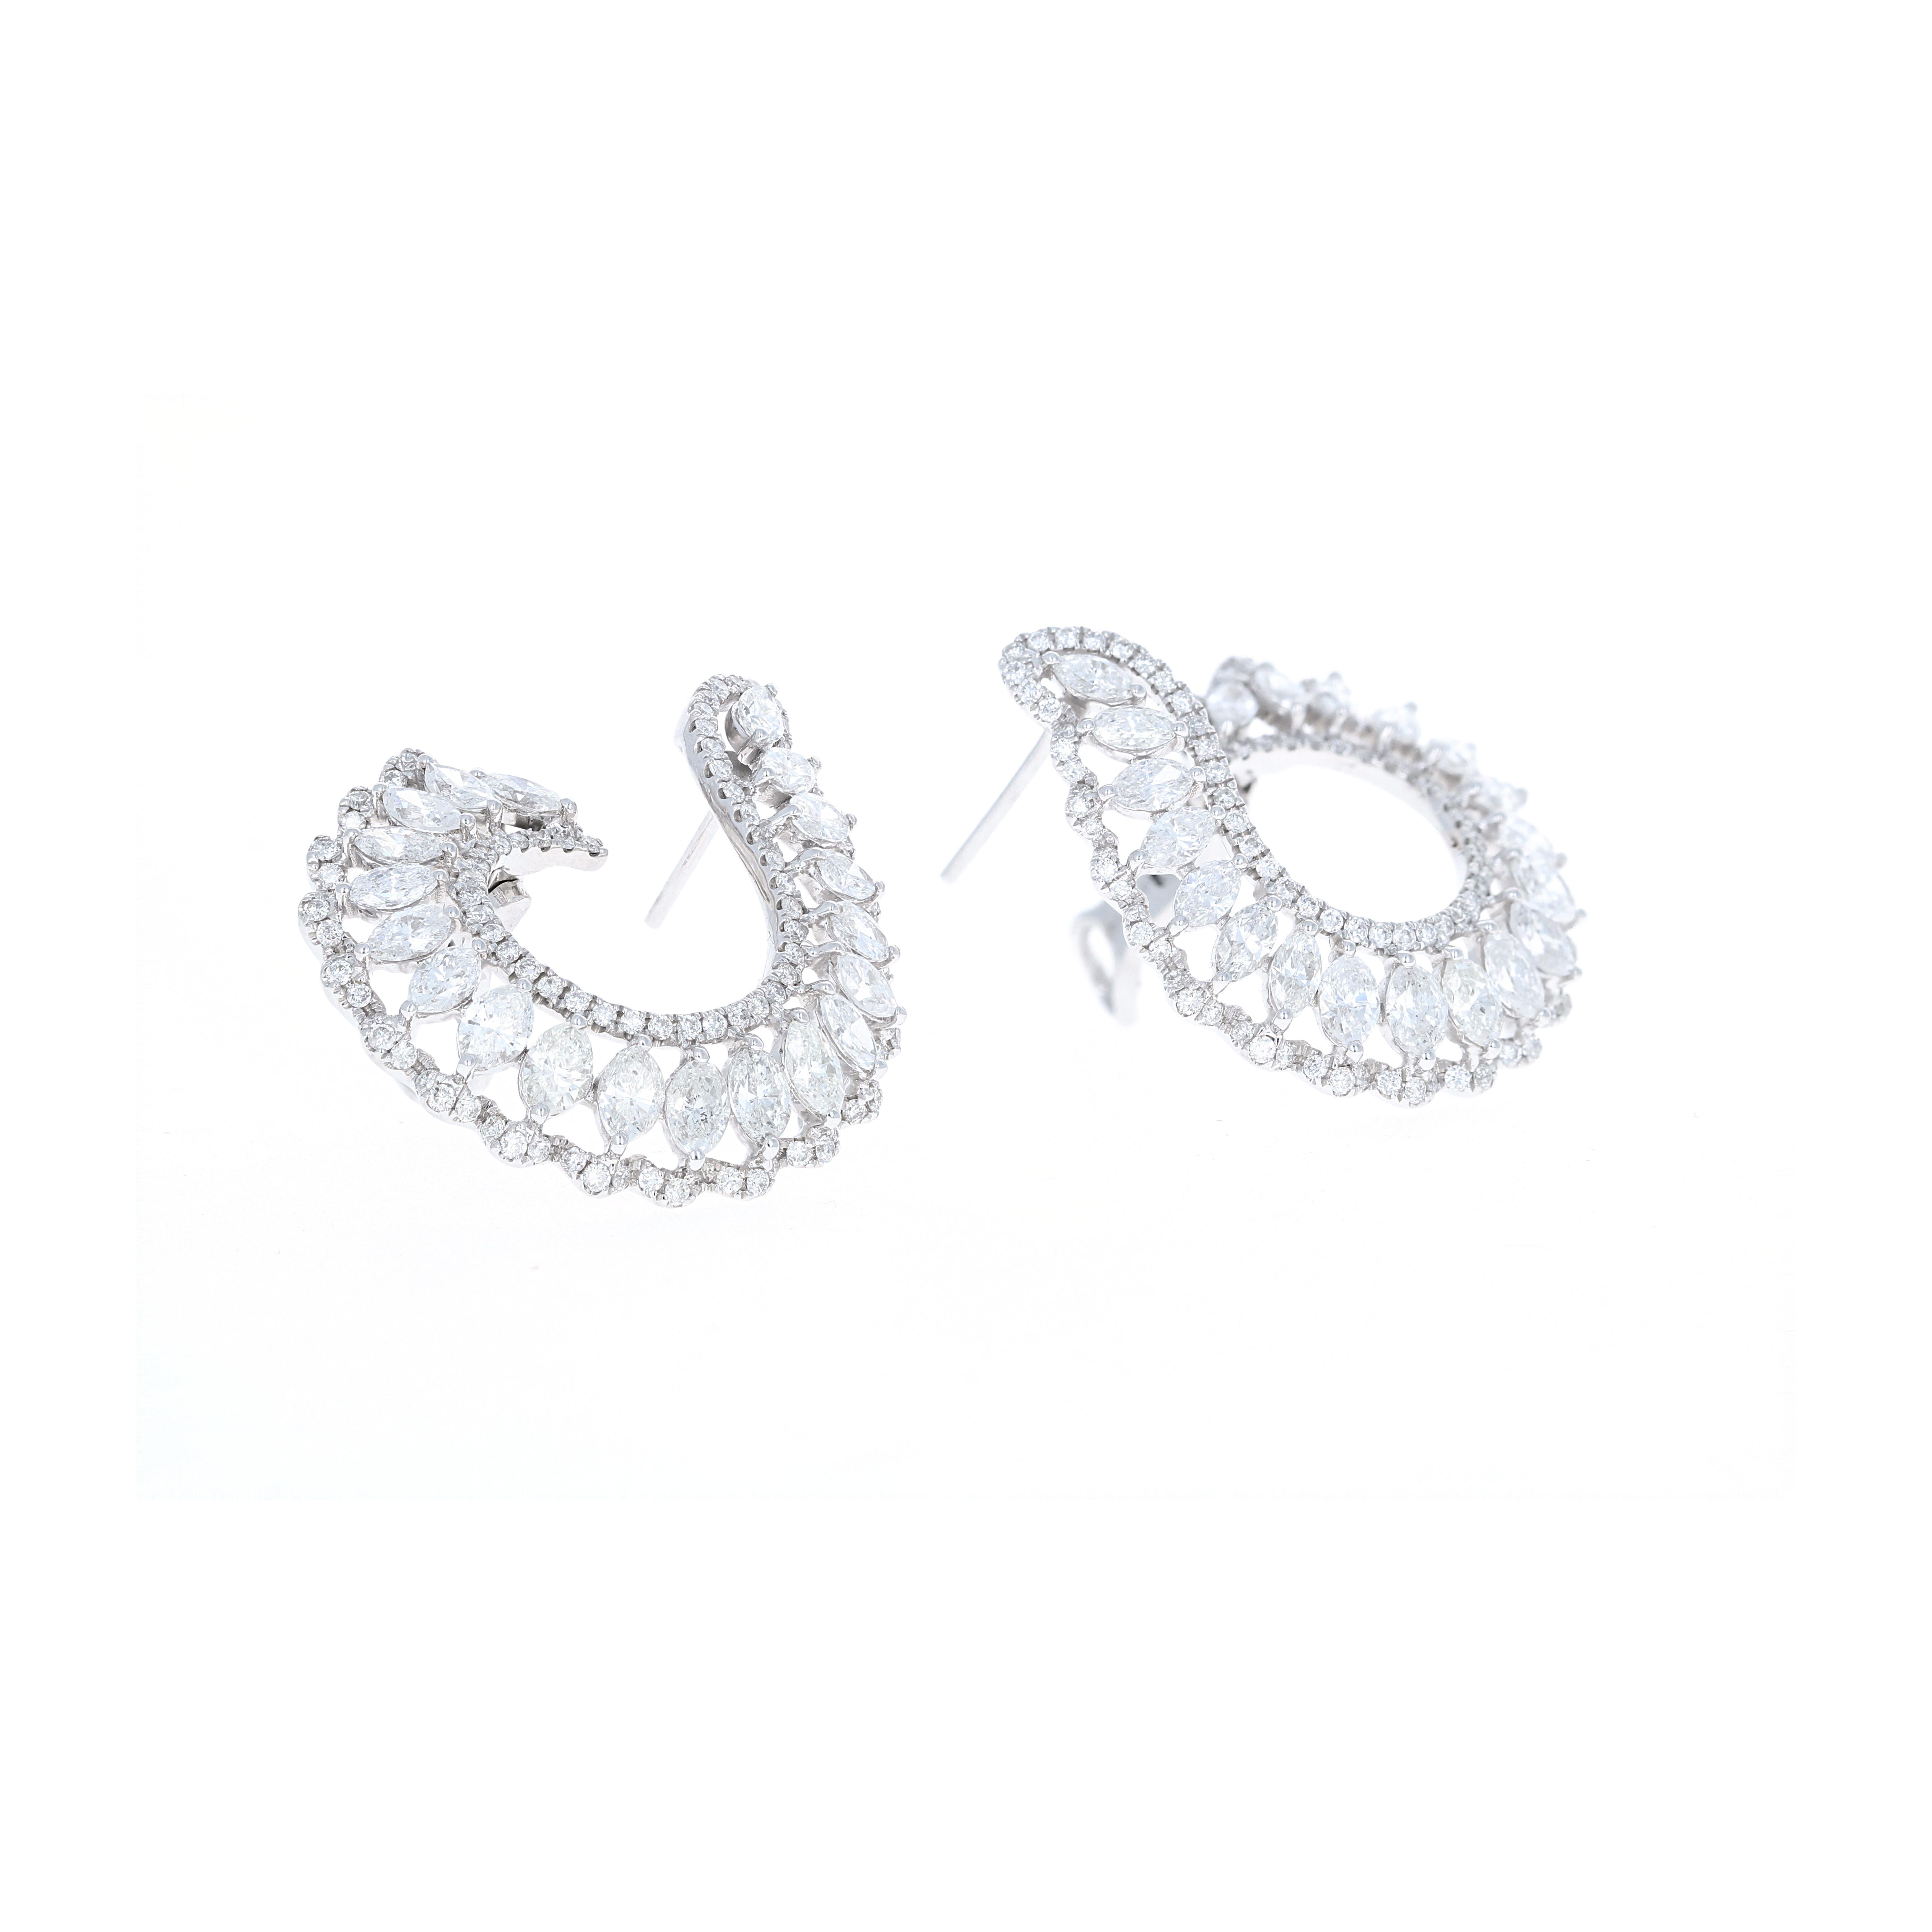 These stunning 18 karat white gold diamond hoop earrings are beautifully made and easy to wear. They have a total weight of 5.11 carats in diamonds. The diamonds are round and marquise shape. There are 206 round brilliant diamonds and 40 marquise